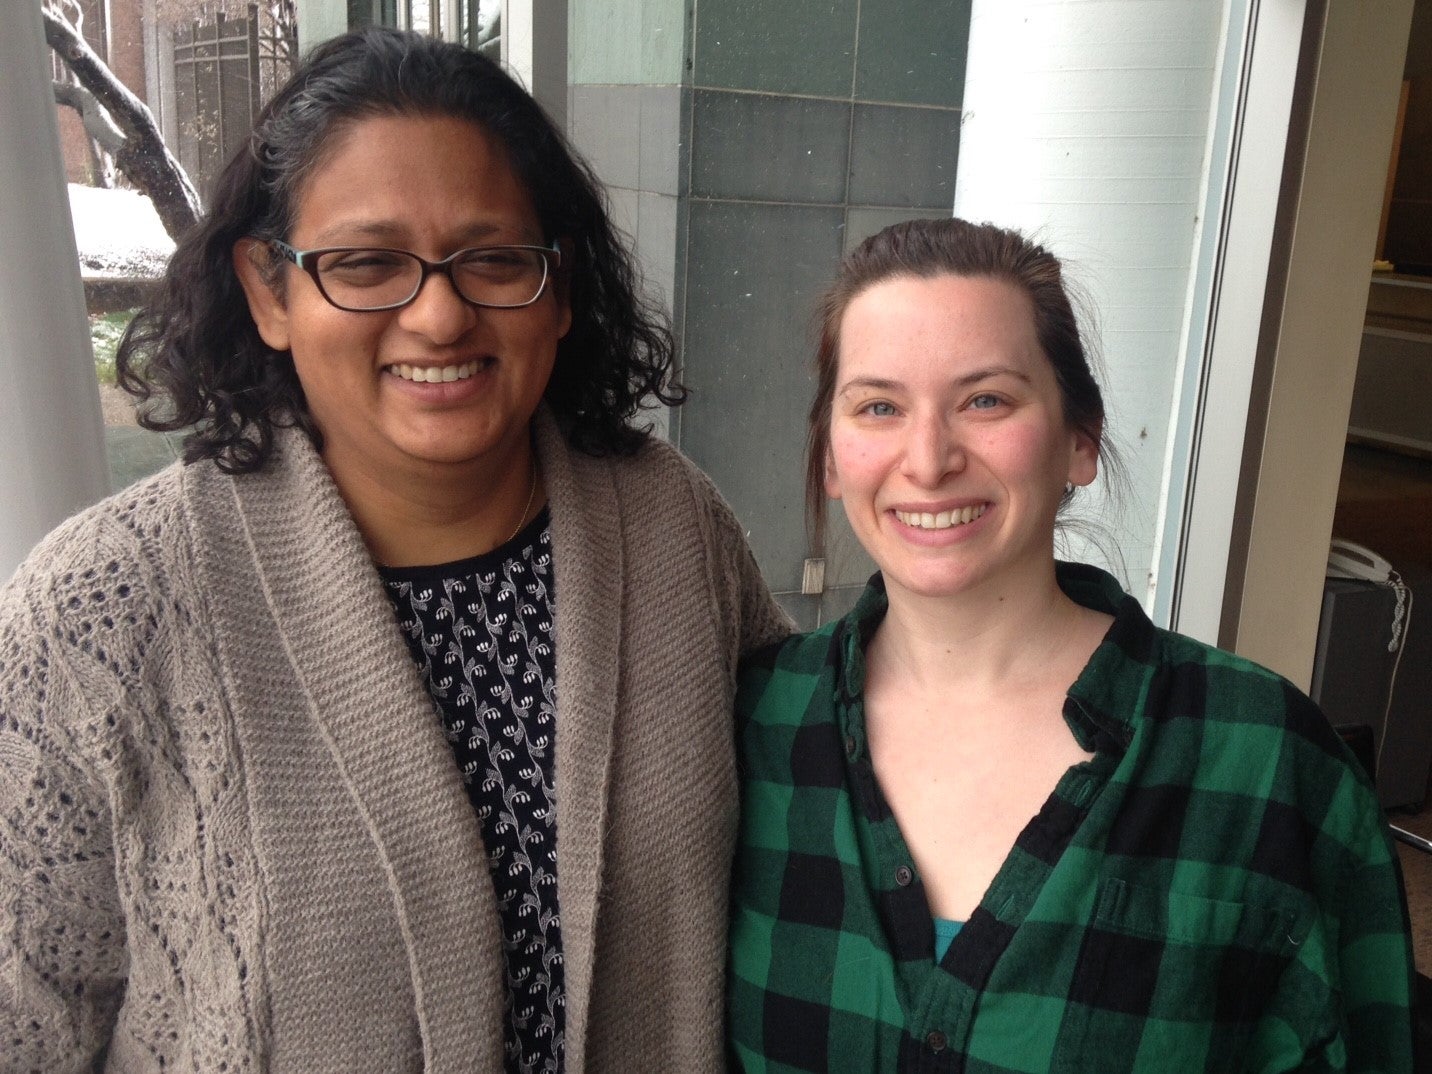  Nancy Chacko (left) and Jessica Lennick are organizers of the group 'Tuesdays with Toomey.' They have been trying to get the Republican senator to meet for a town hall in Philadelphia. (Jennifer Lynn/WHYY) 